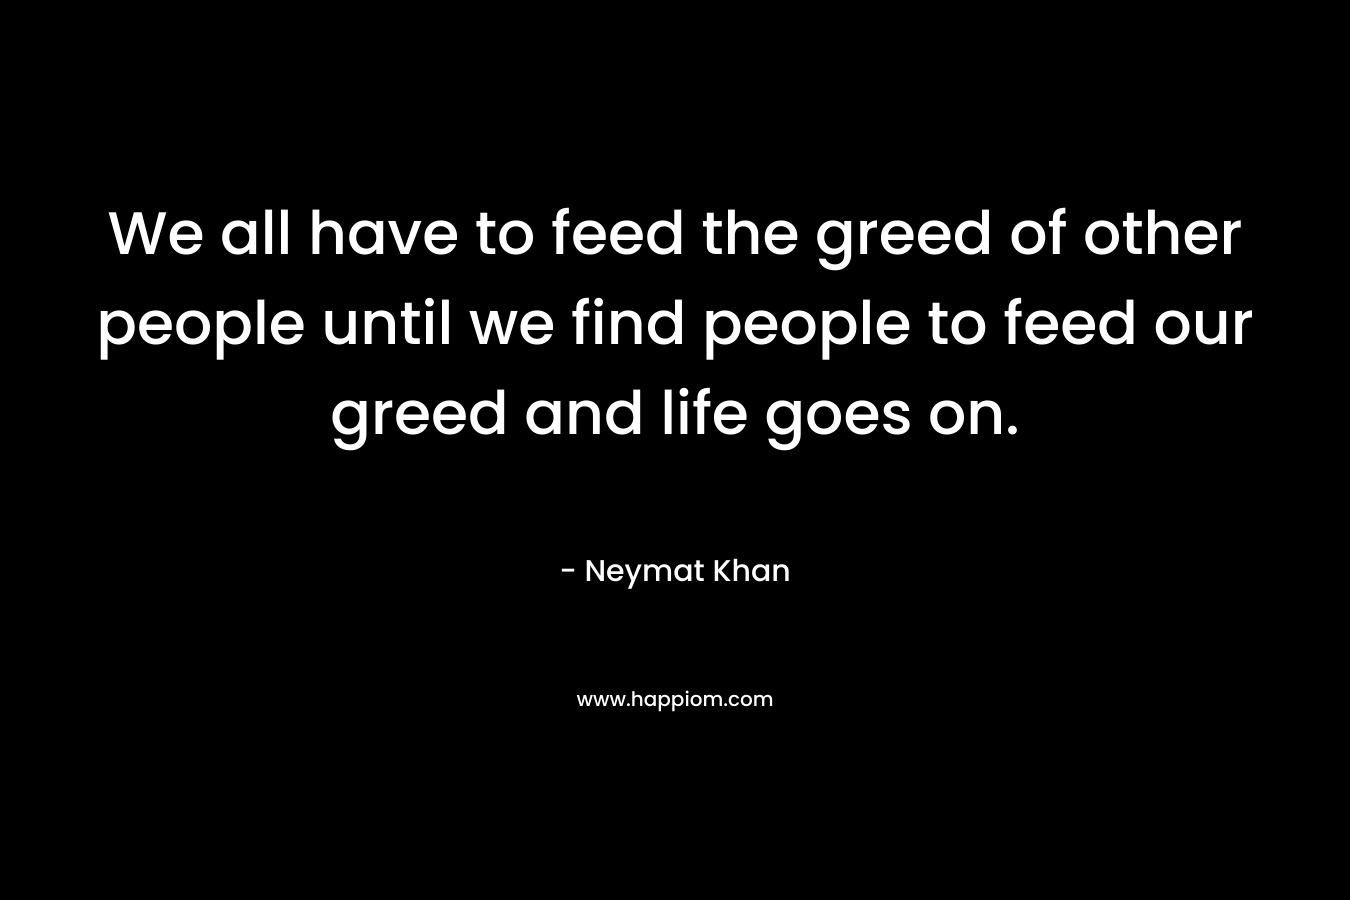 We all have to feed the greed of other people until we find people to feed our greed and life goes on. – Neymat Khan